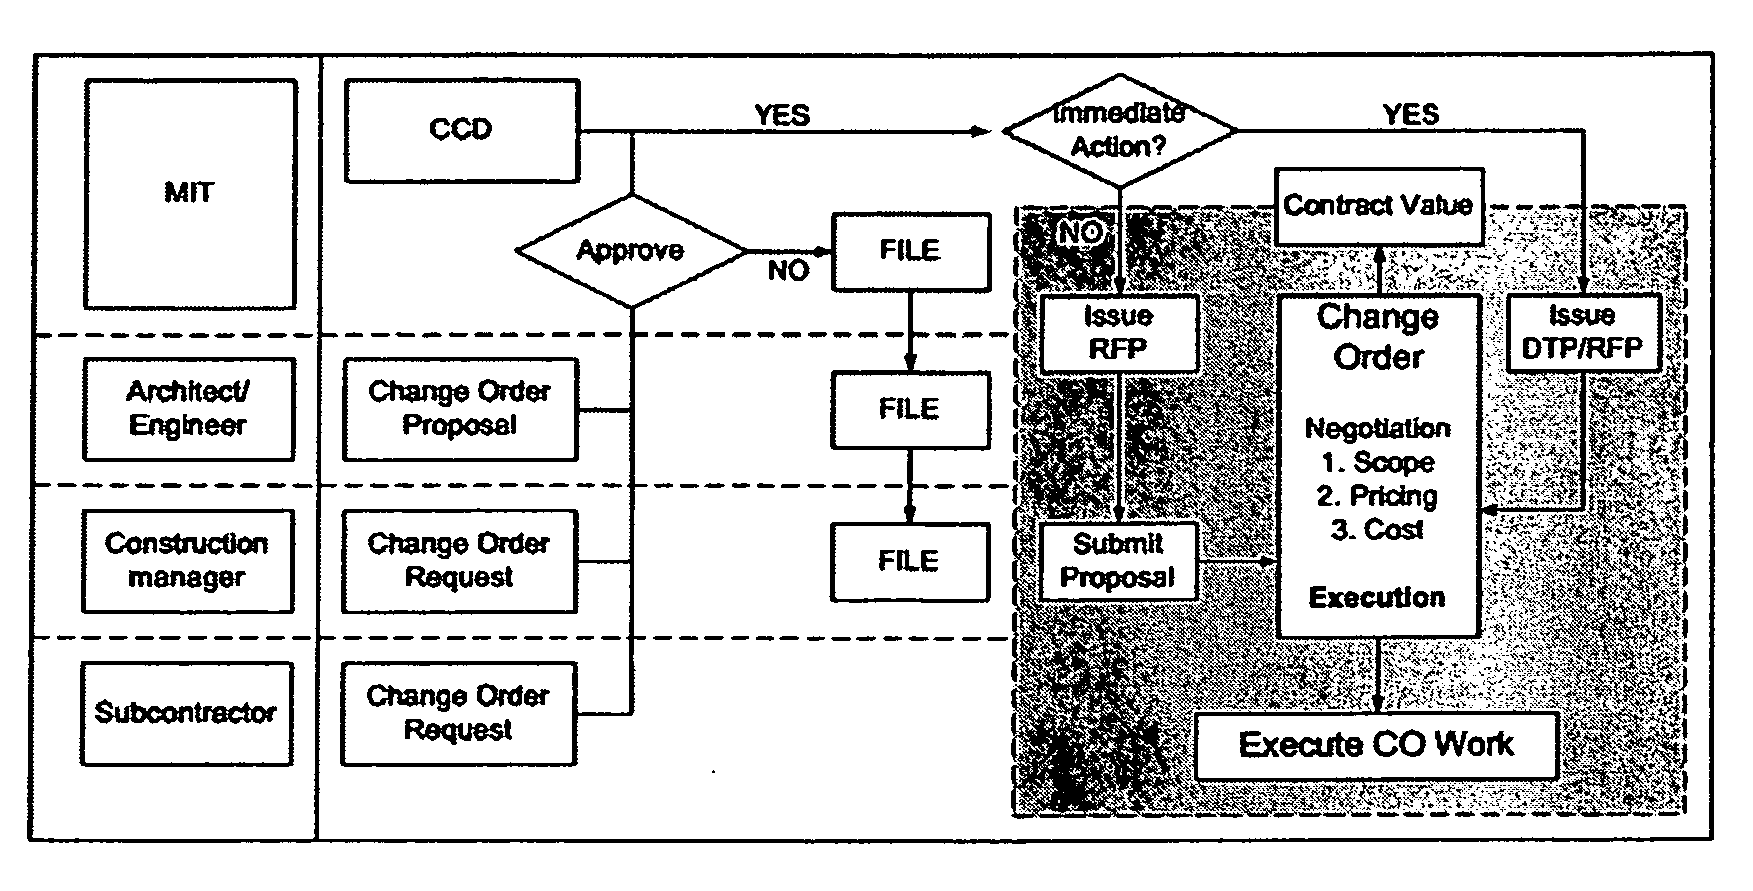 System and method for visually representing project metrics on 3-dimensional building models